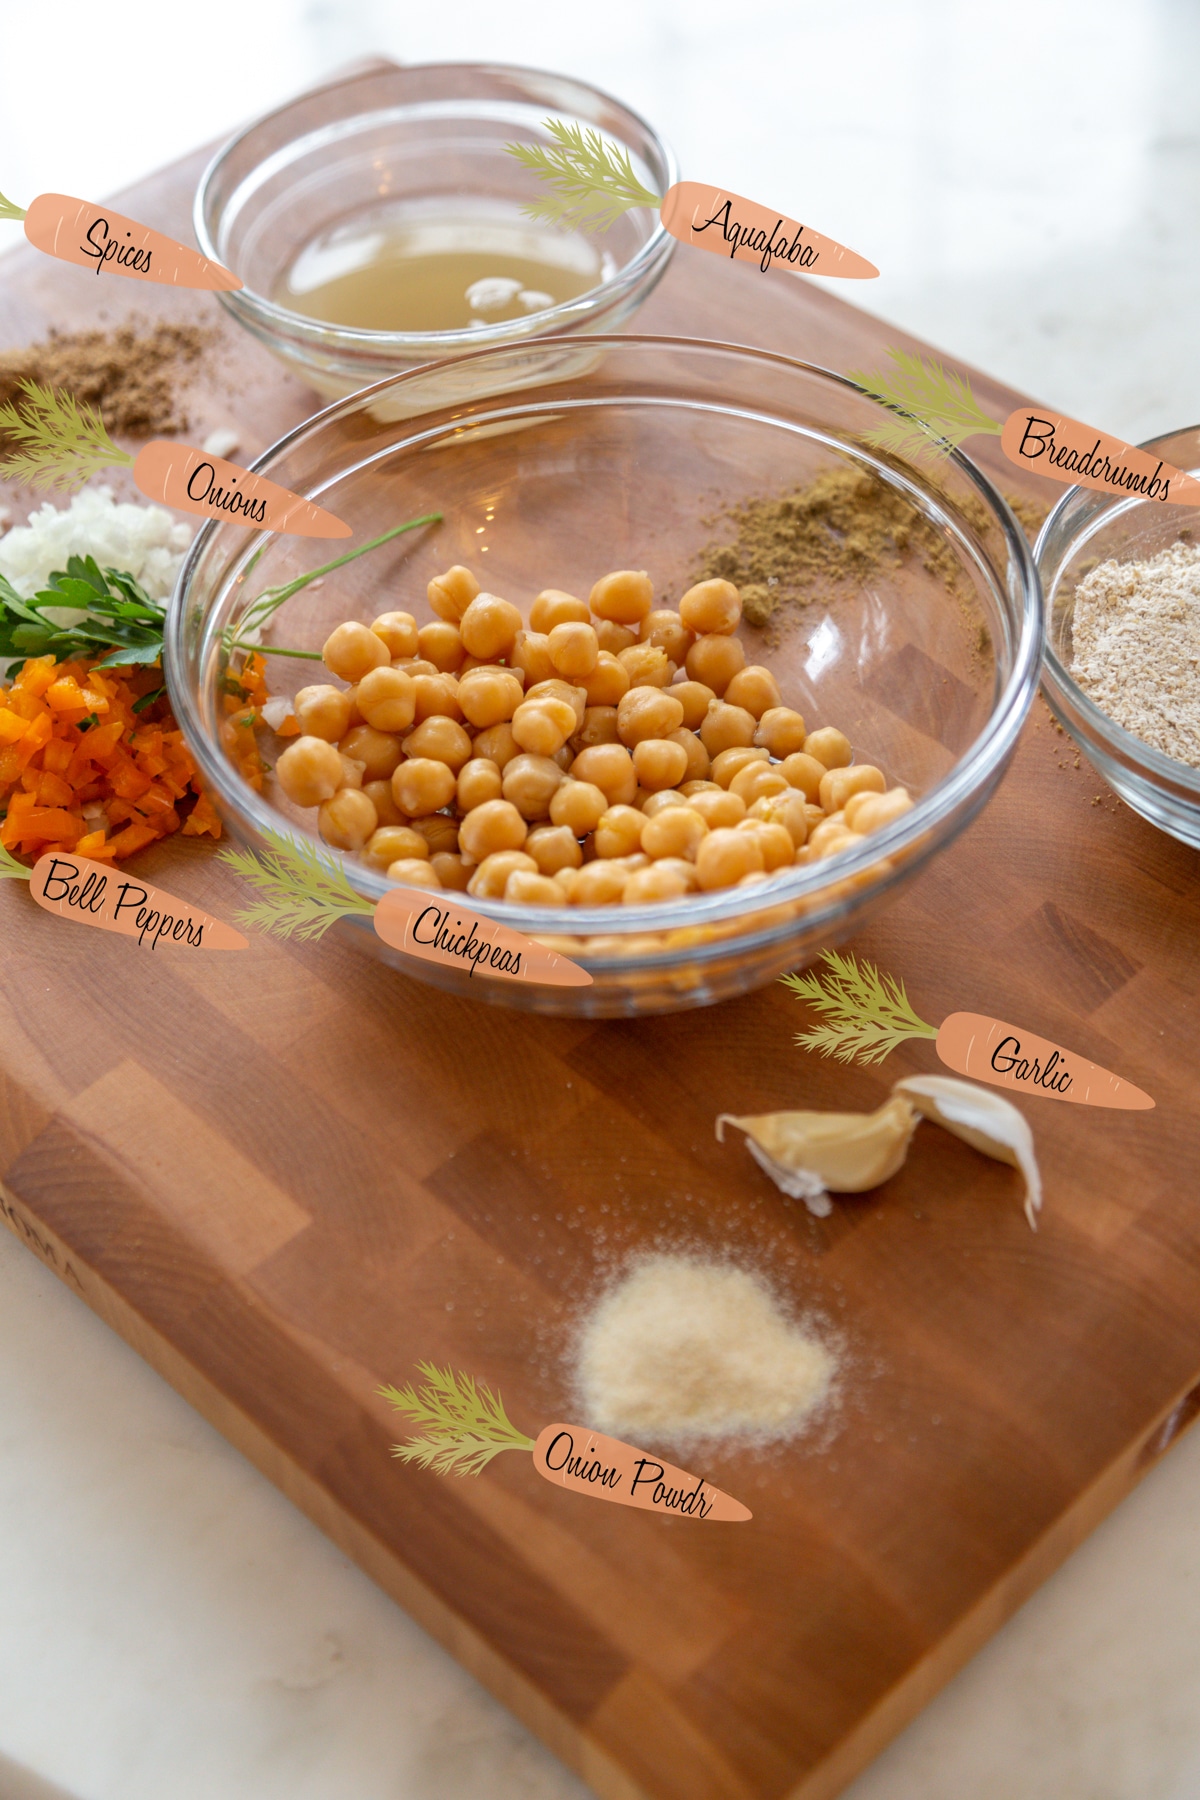 Ingredients to make chickpea burgers.